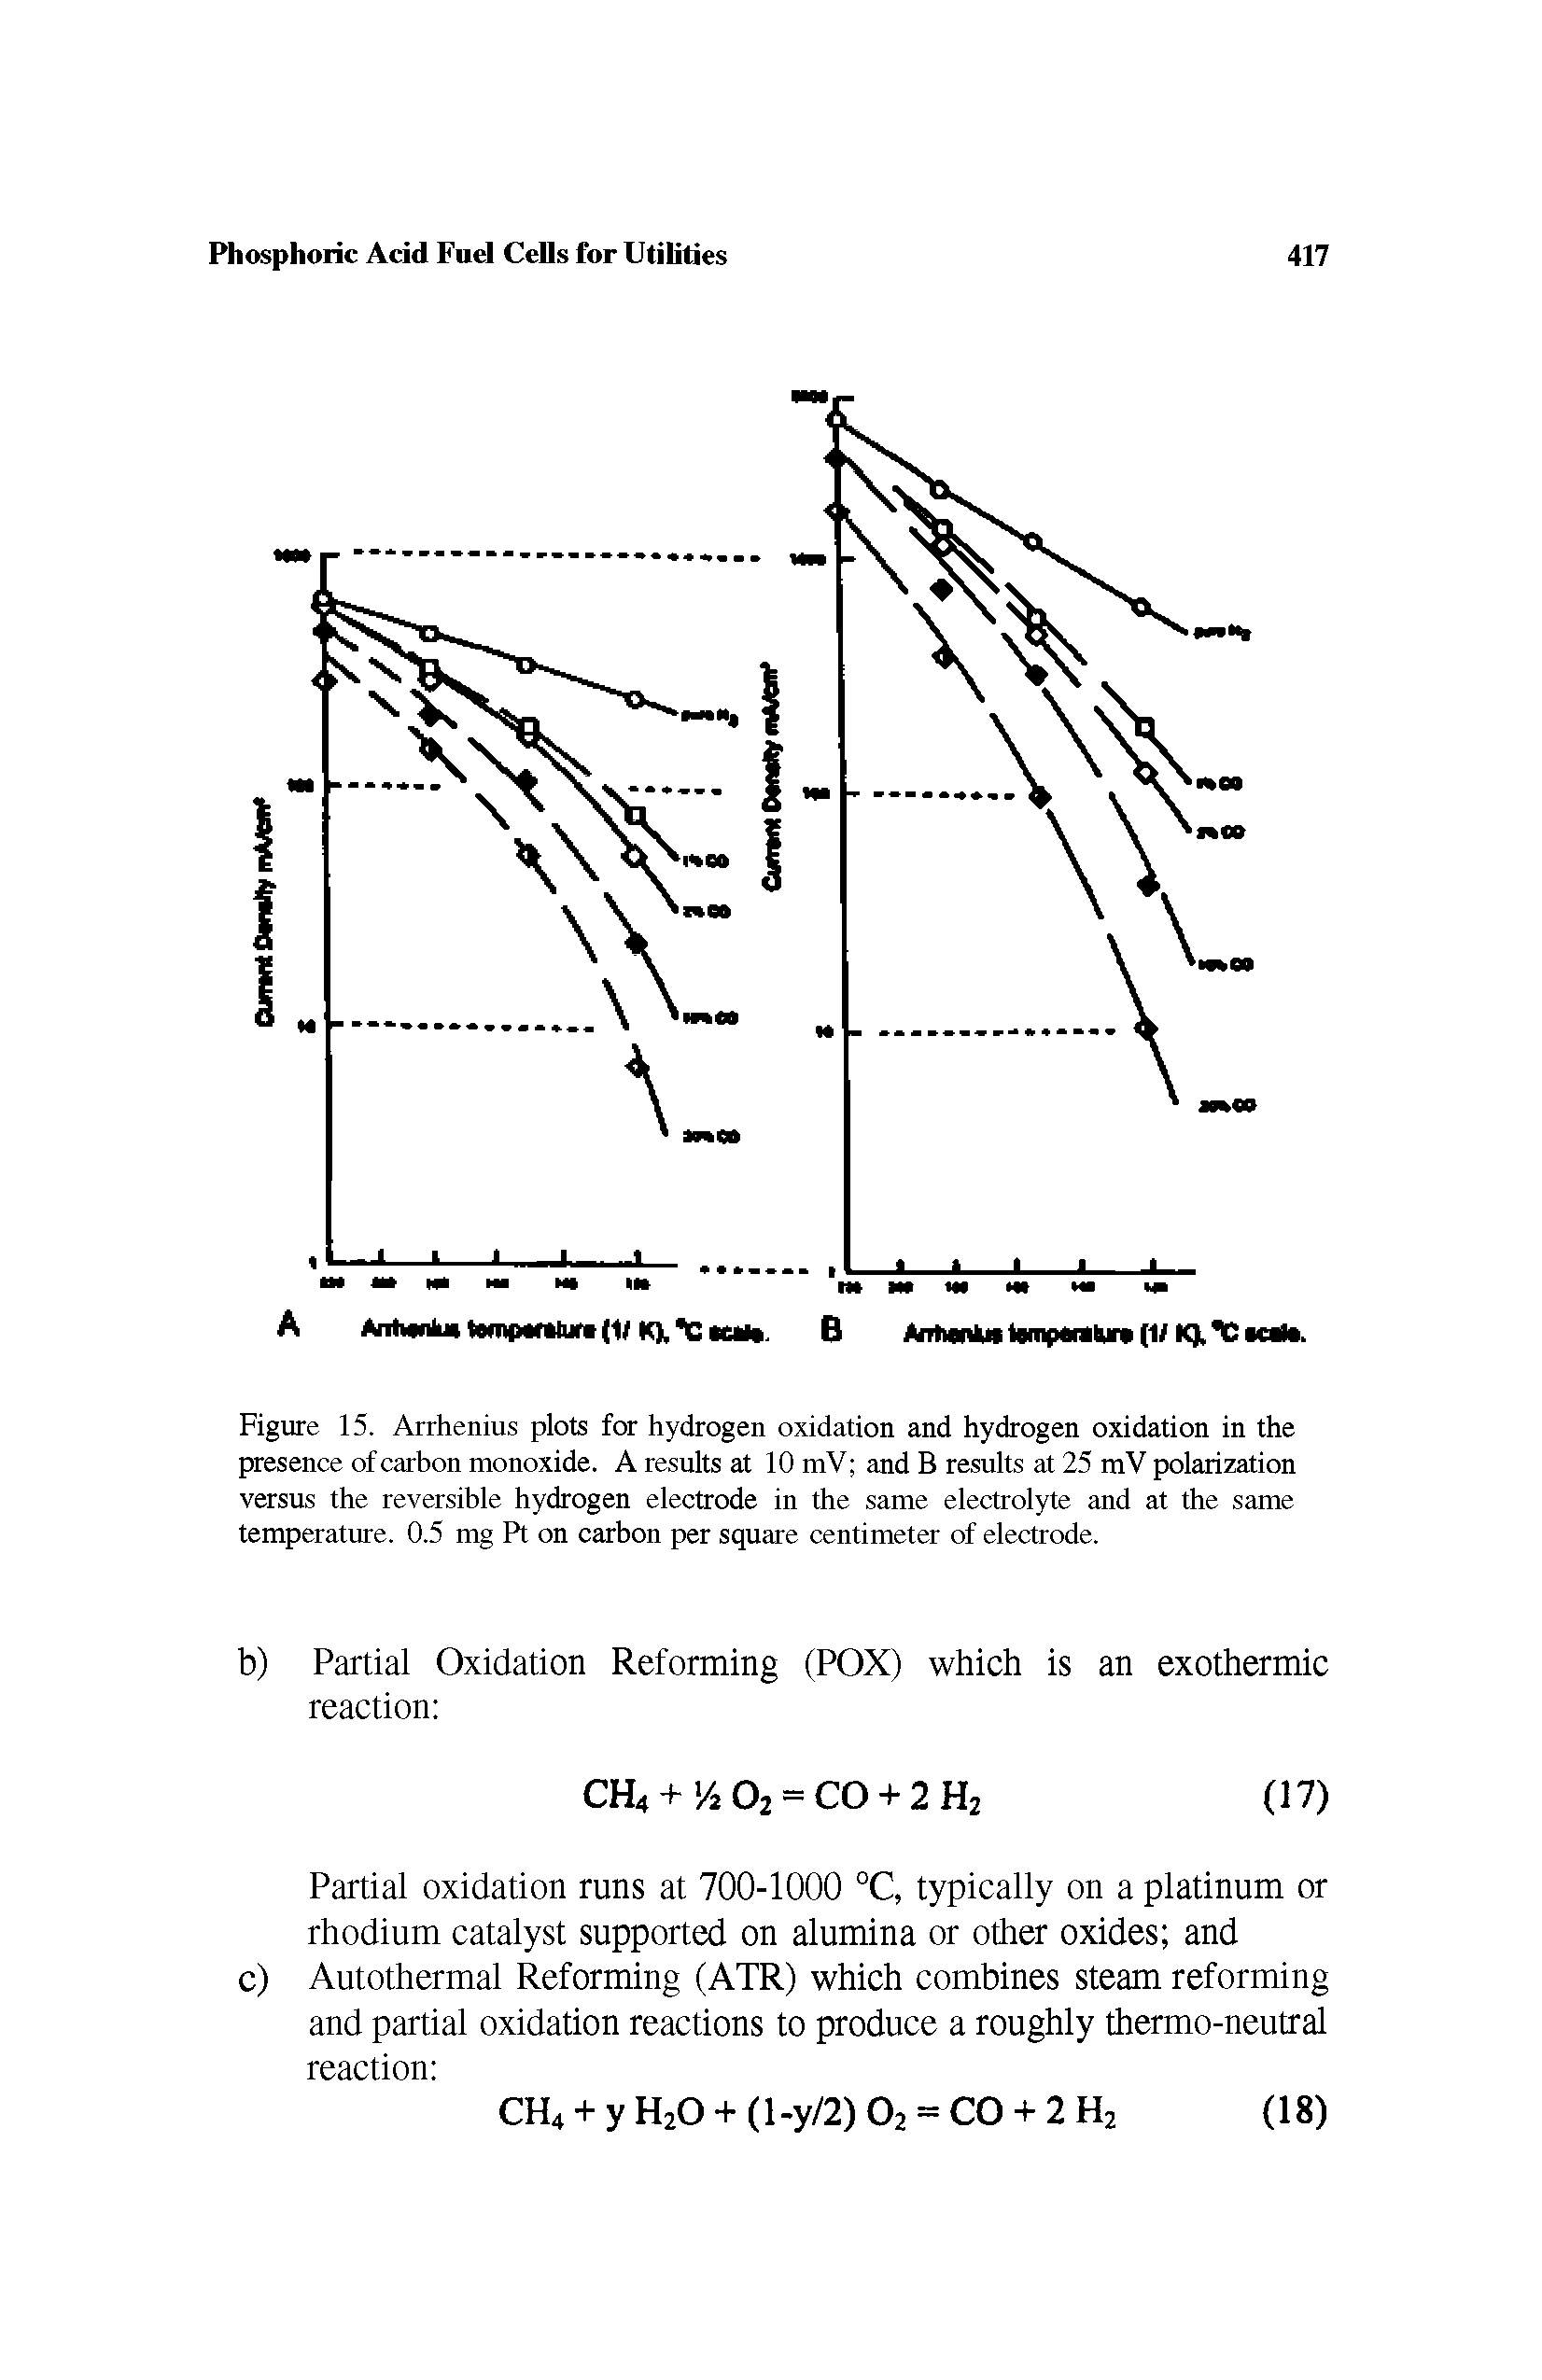 Figure 15. Arrhenius plots for hydrogen oxidation and hydrogen oxidation in the presence of carbon monoxide. A results at 10 mV and B results at 25 mV polarization versus the reversible hydrogen electrode in the same electrolyte and at the same temperature. 0.5 mg Pt on carbon per square centimeter of electrode.